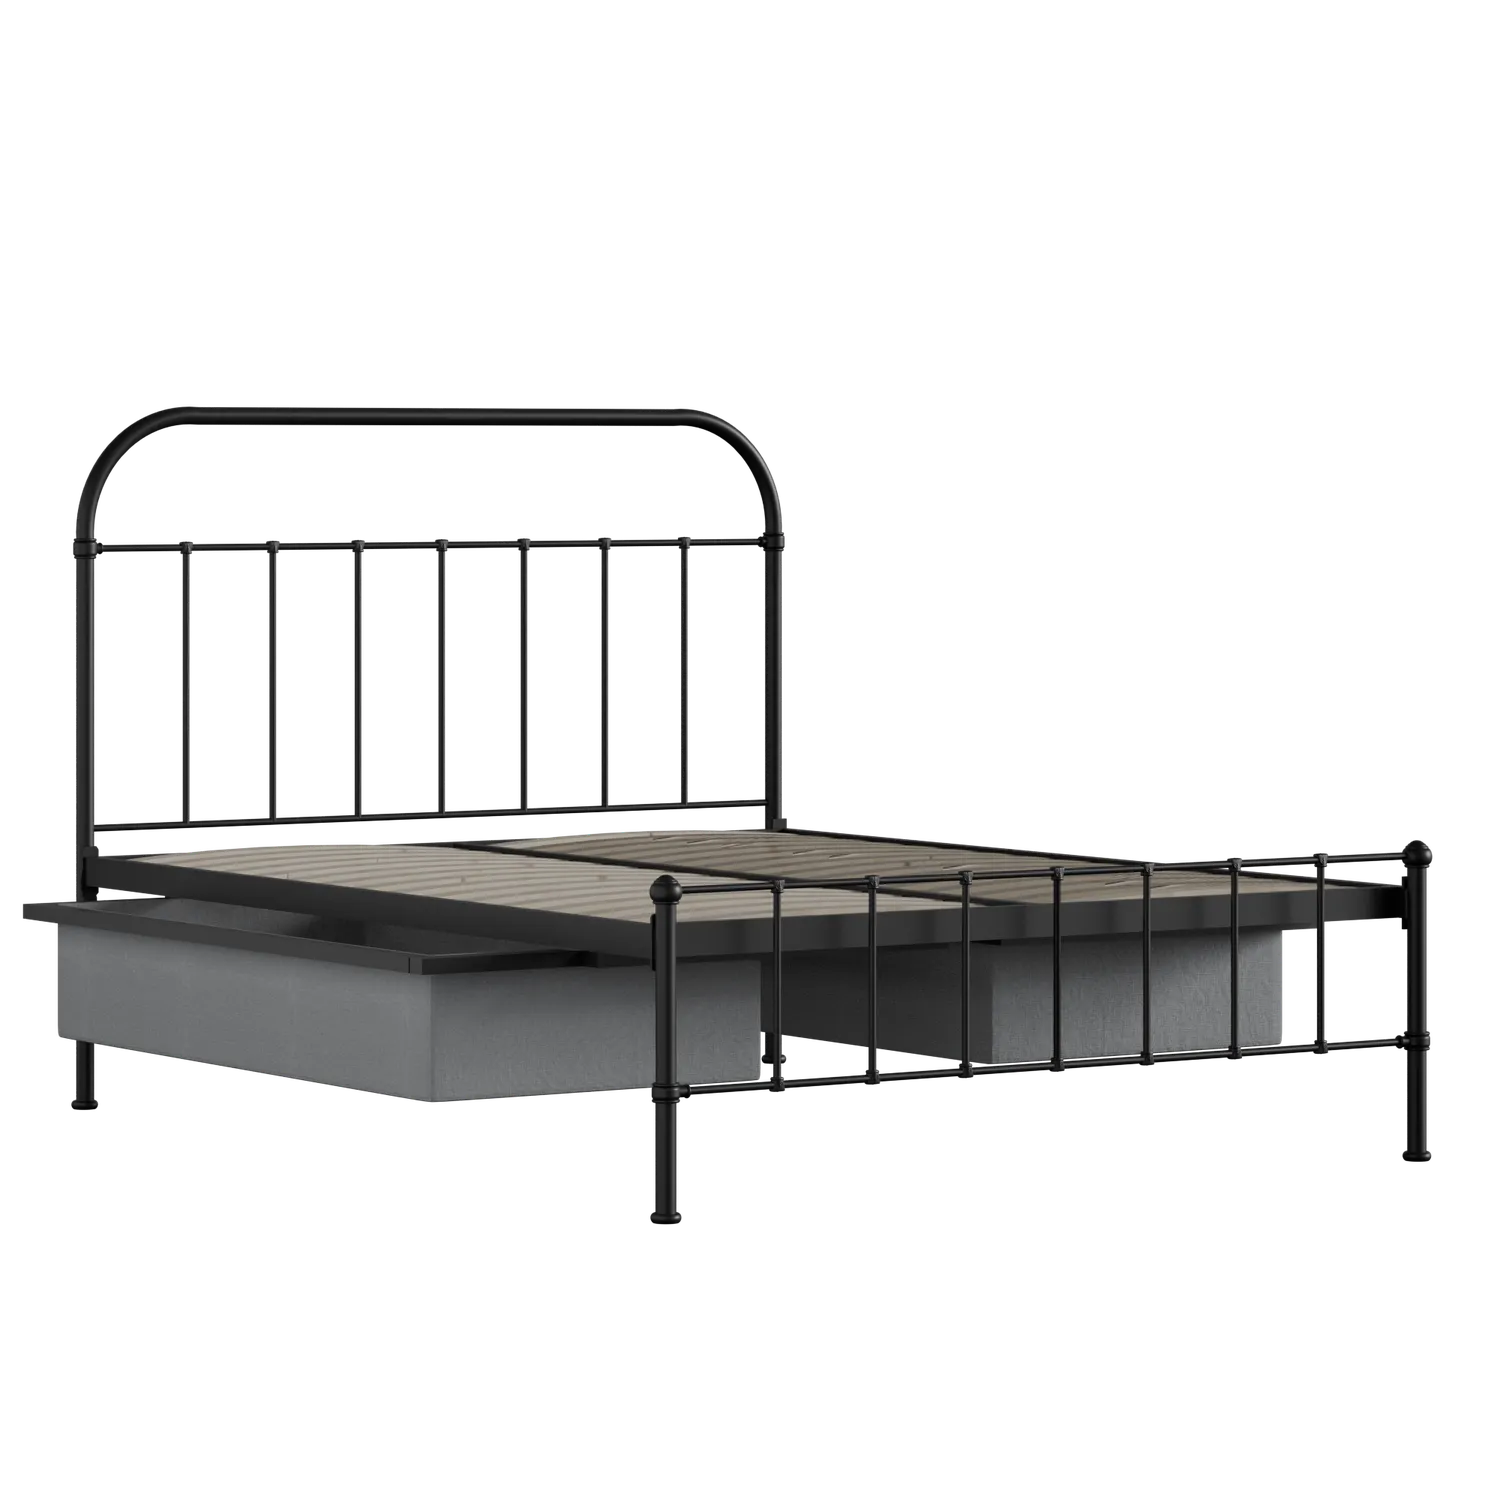 Solomon iron/metal bed in black with drawers